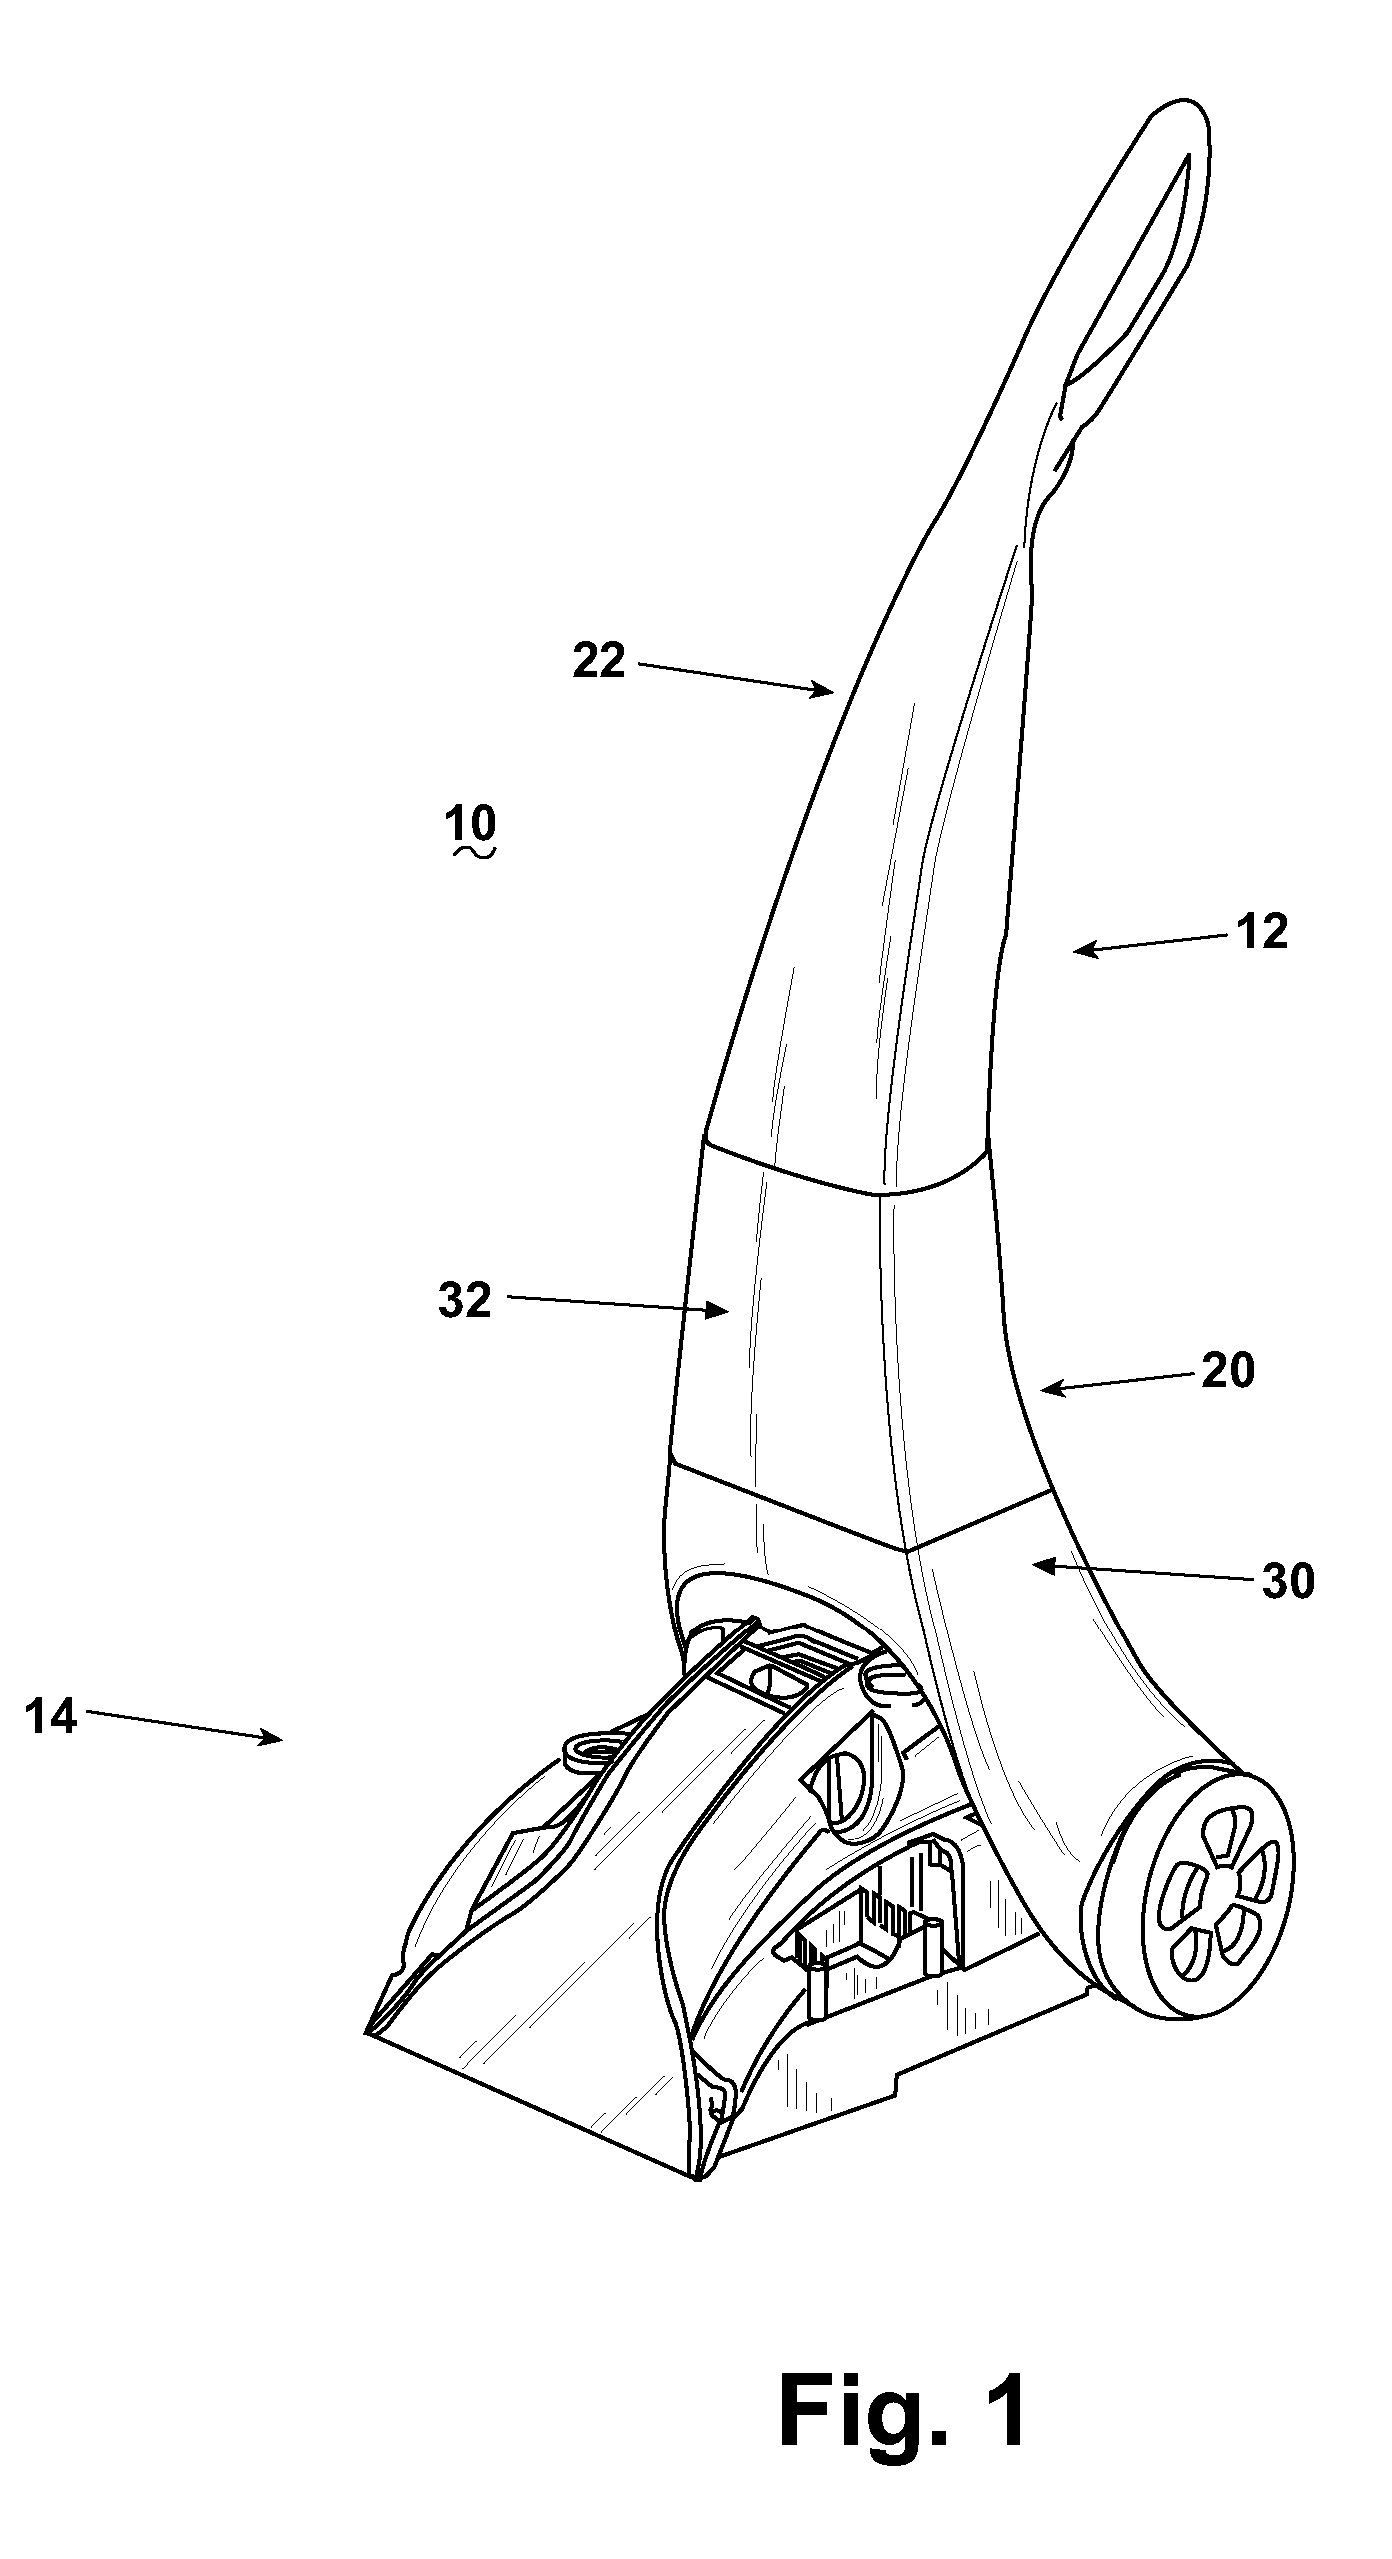 Surface cleaner with folding upright handle and method of packaging same